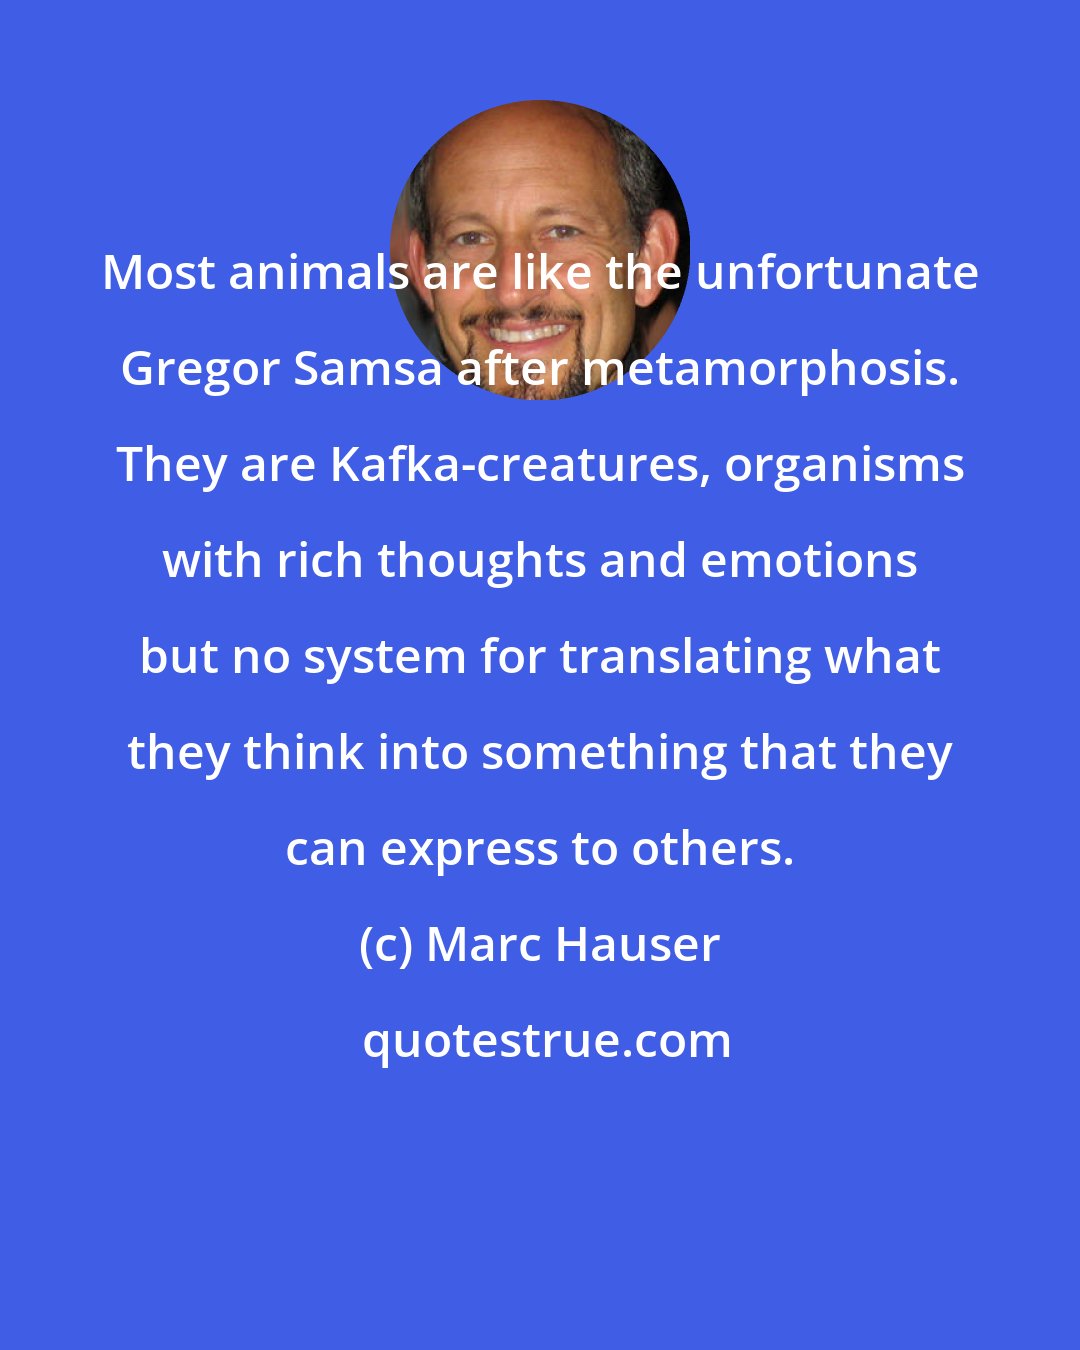 Marc Hauser: Most animals are like the unfortunate Gregor Samsa after metamorphosis. They are Kafka-creatures, organisms with rich thoughts and emotions but no system for translating what they think into something that they can express to others.